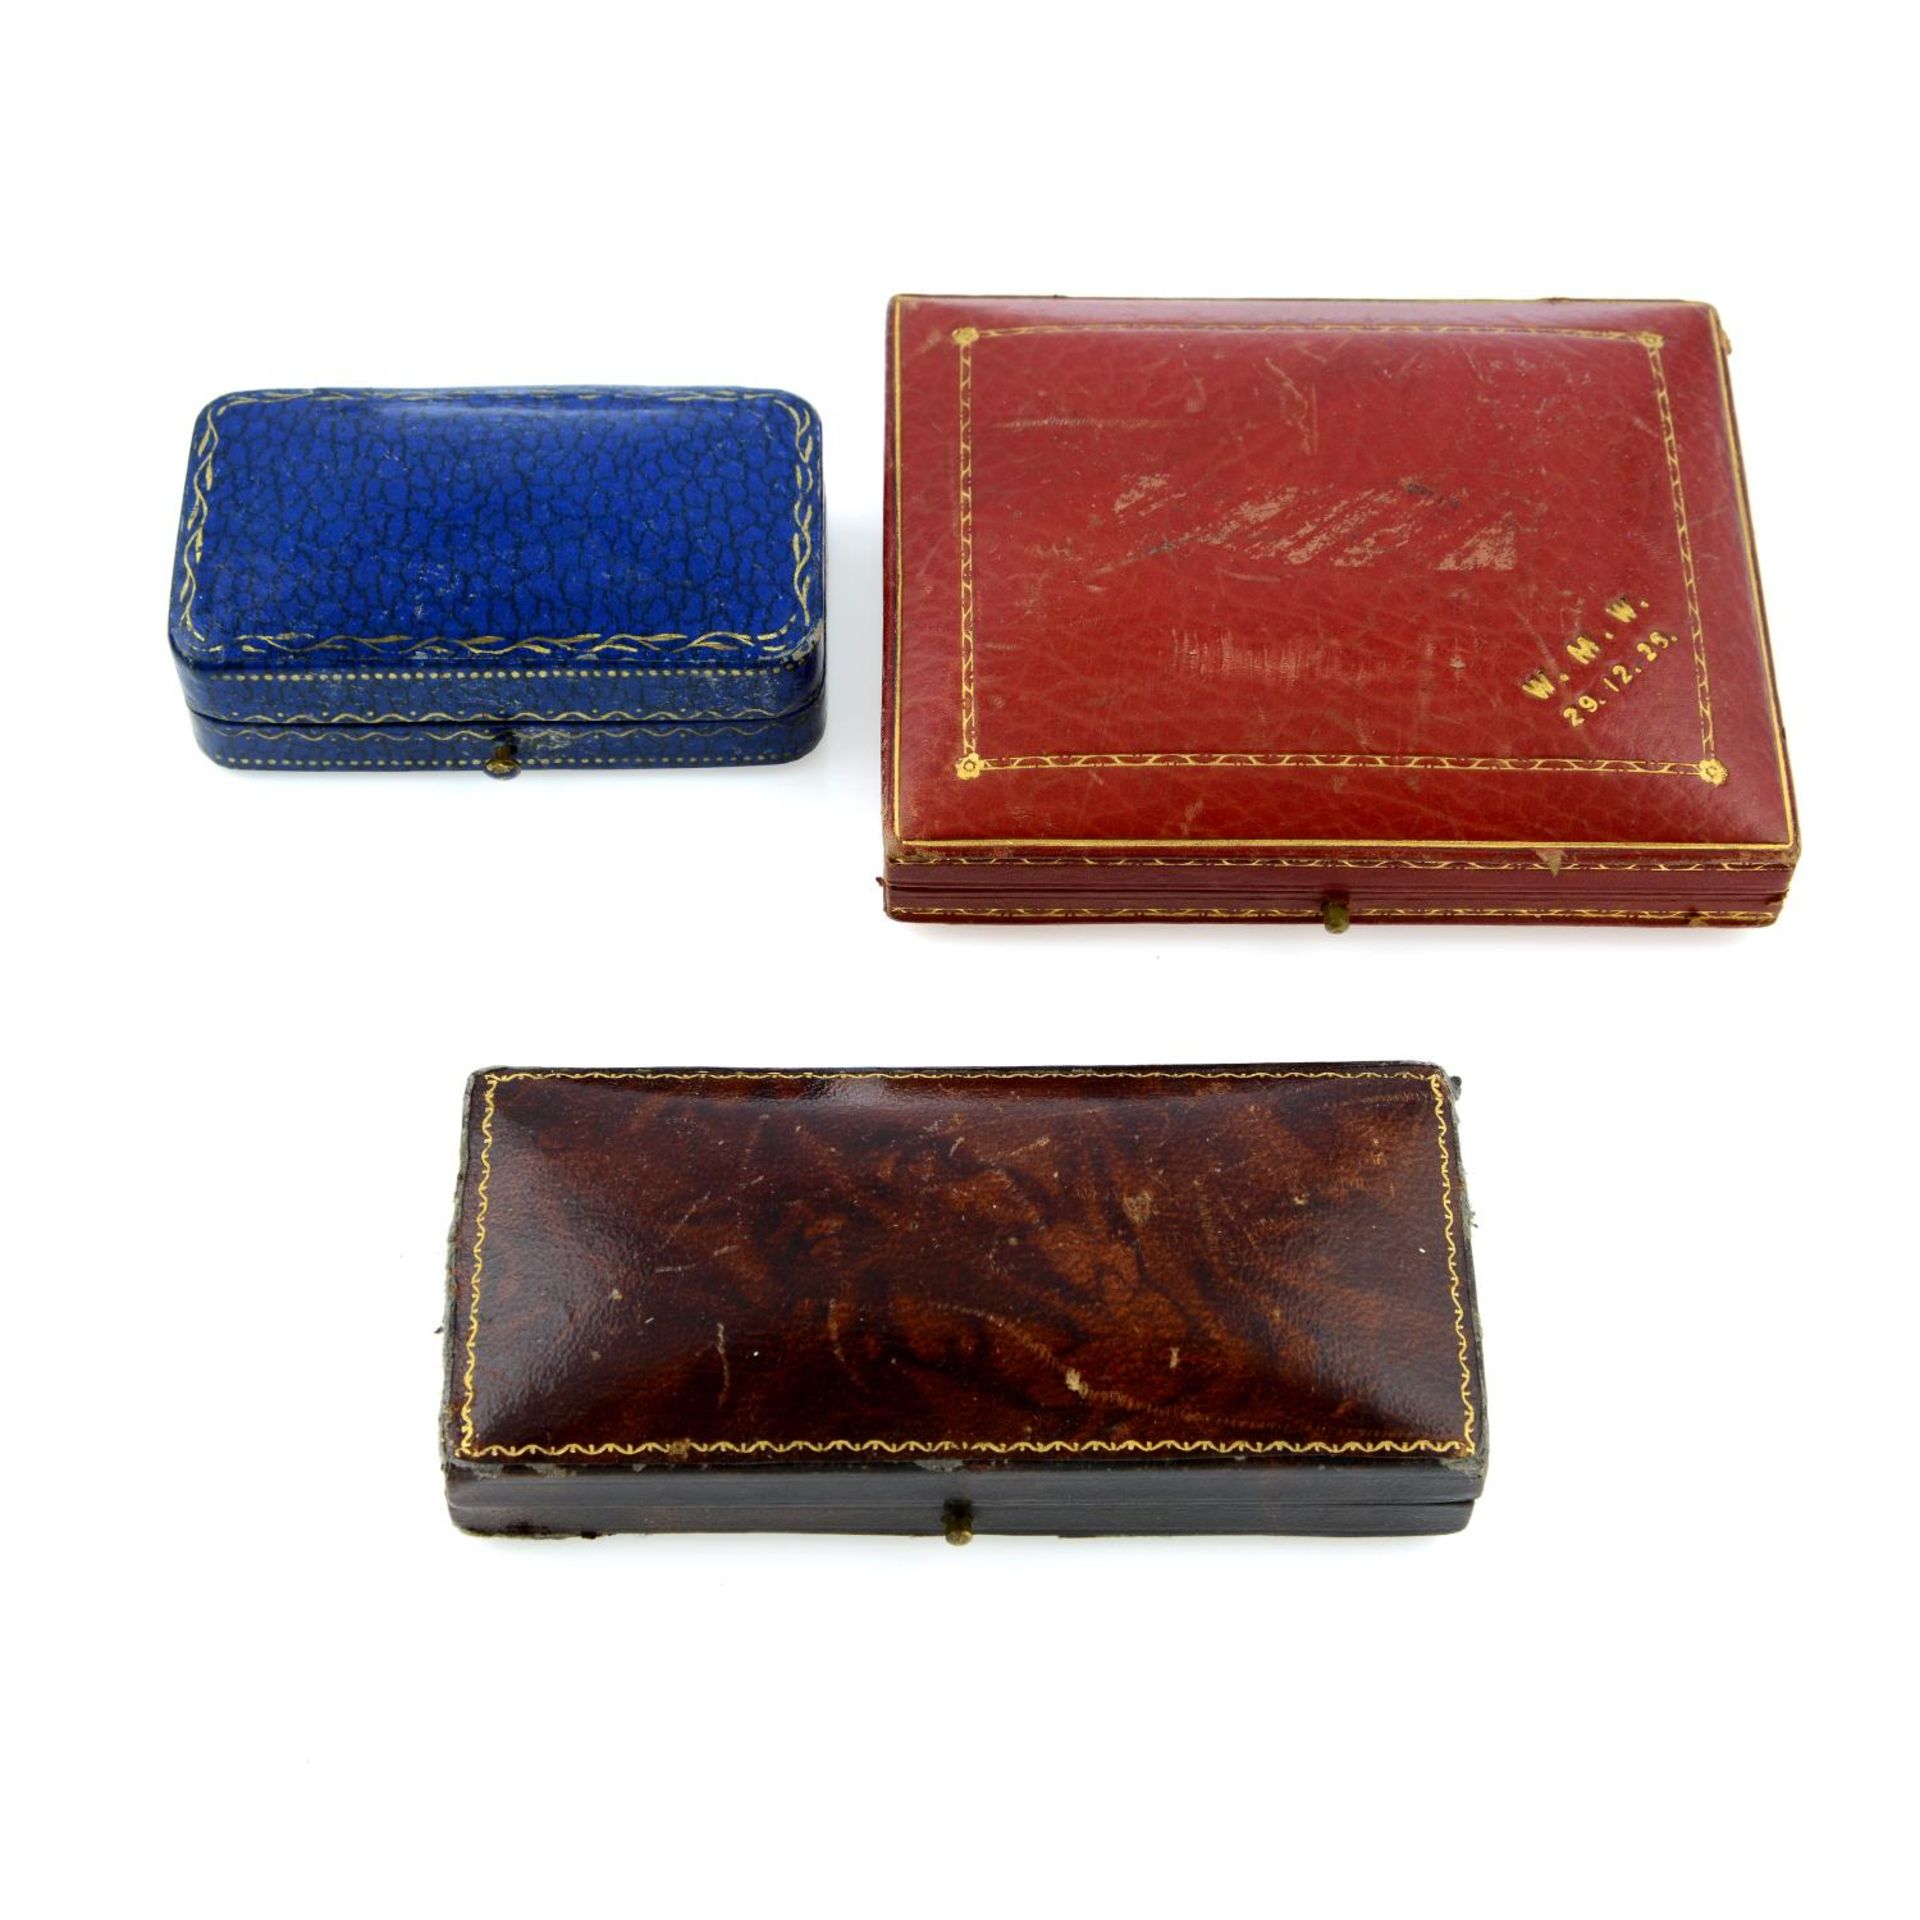 A quantity of antique and vintage jewellery boxes.